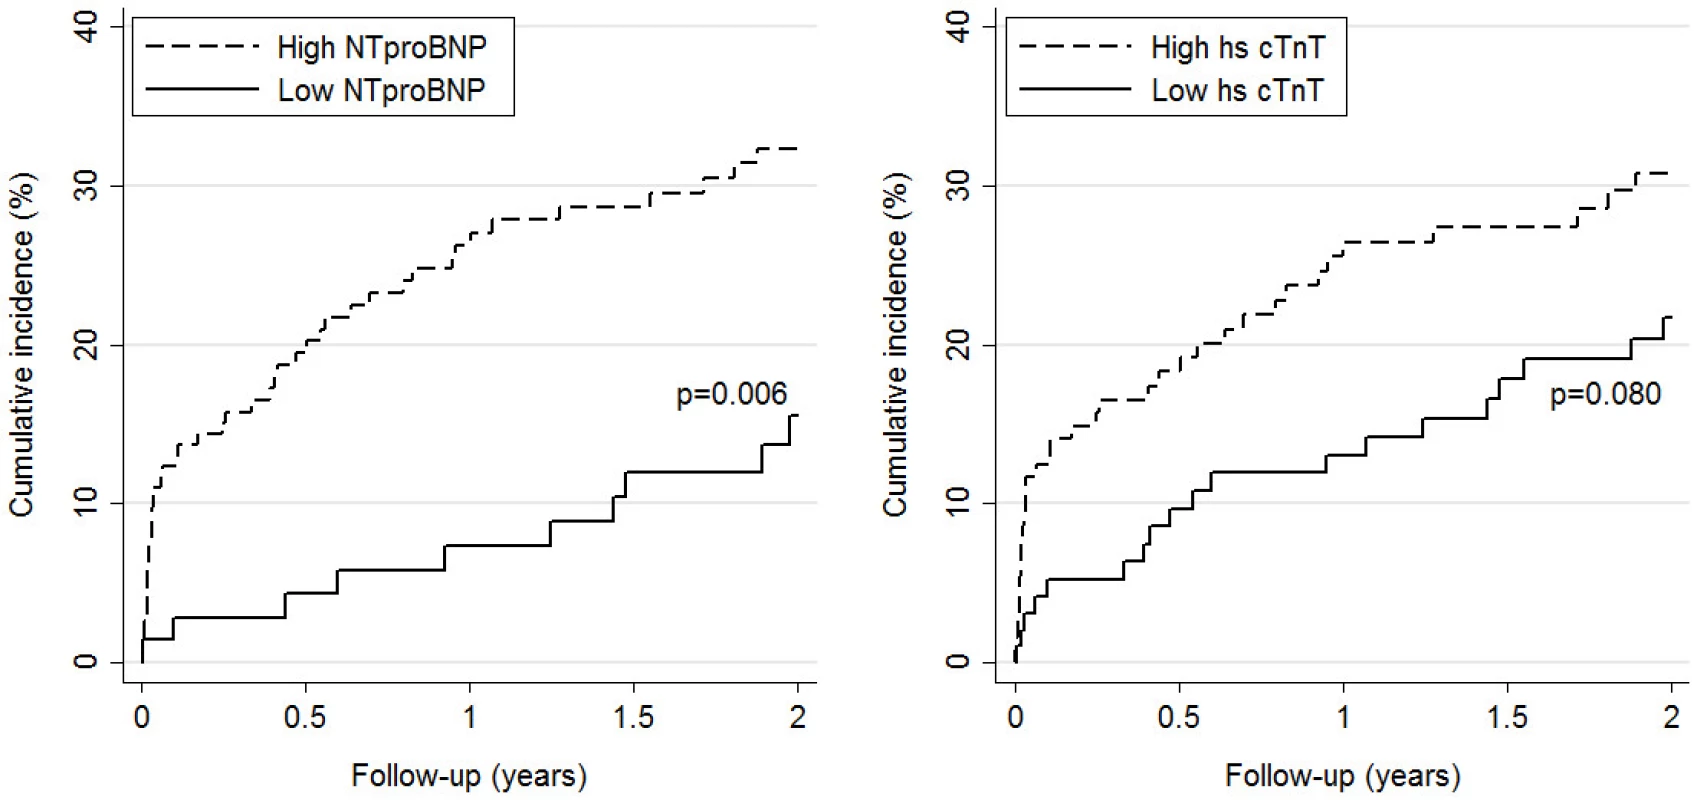 Cumulative incidence of PE-related complications by level of NT-proBNP (left panel) and hscTnT (right panel). High versus low levels are based on pre-specified cut-offs (>300 pg/mL for NT-proBNP and >14 ng/L for hs-cTnT).